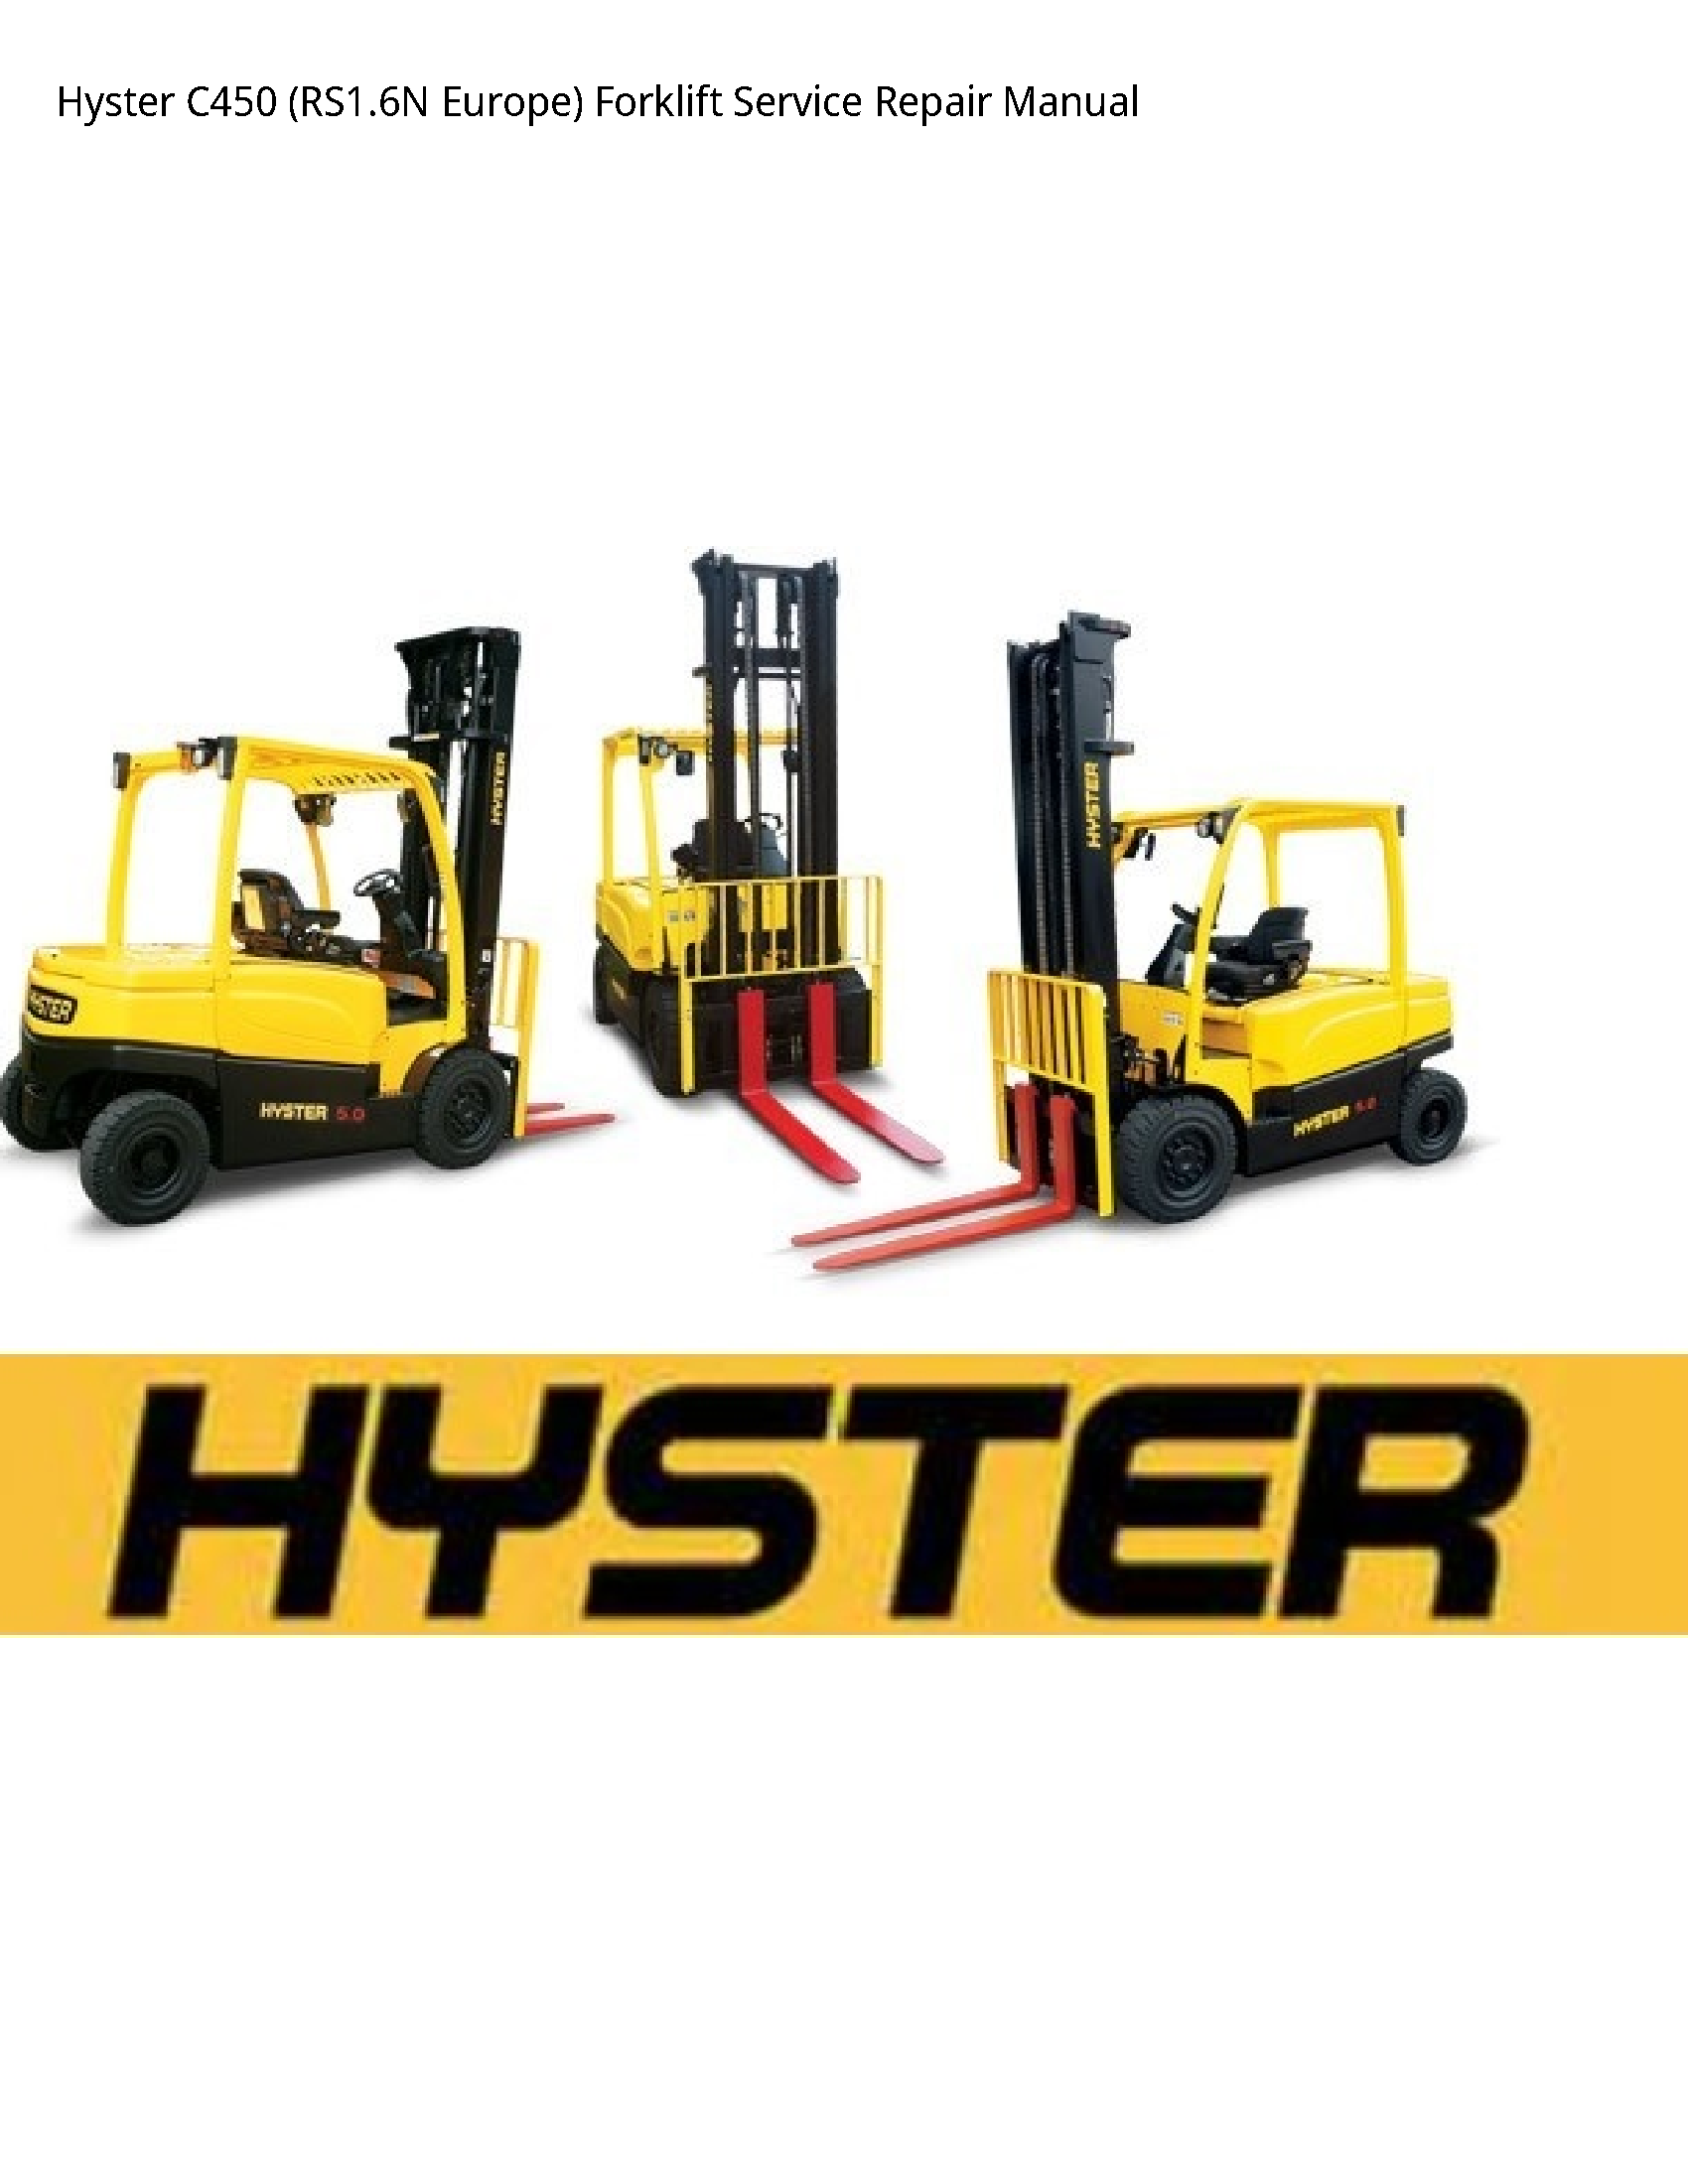 Hyster C450 Europe) Forklift manual